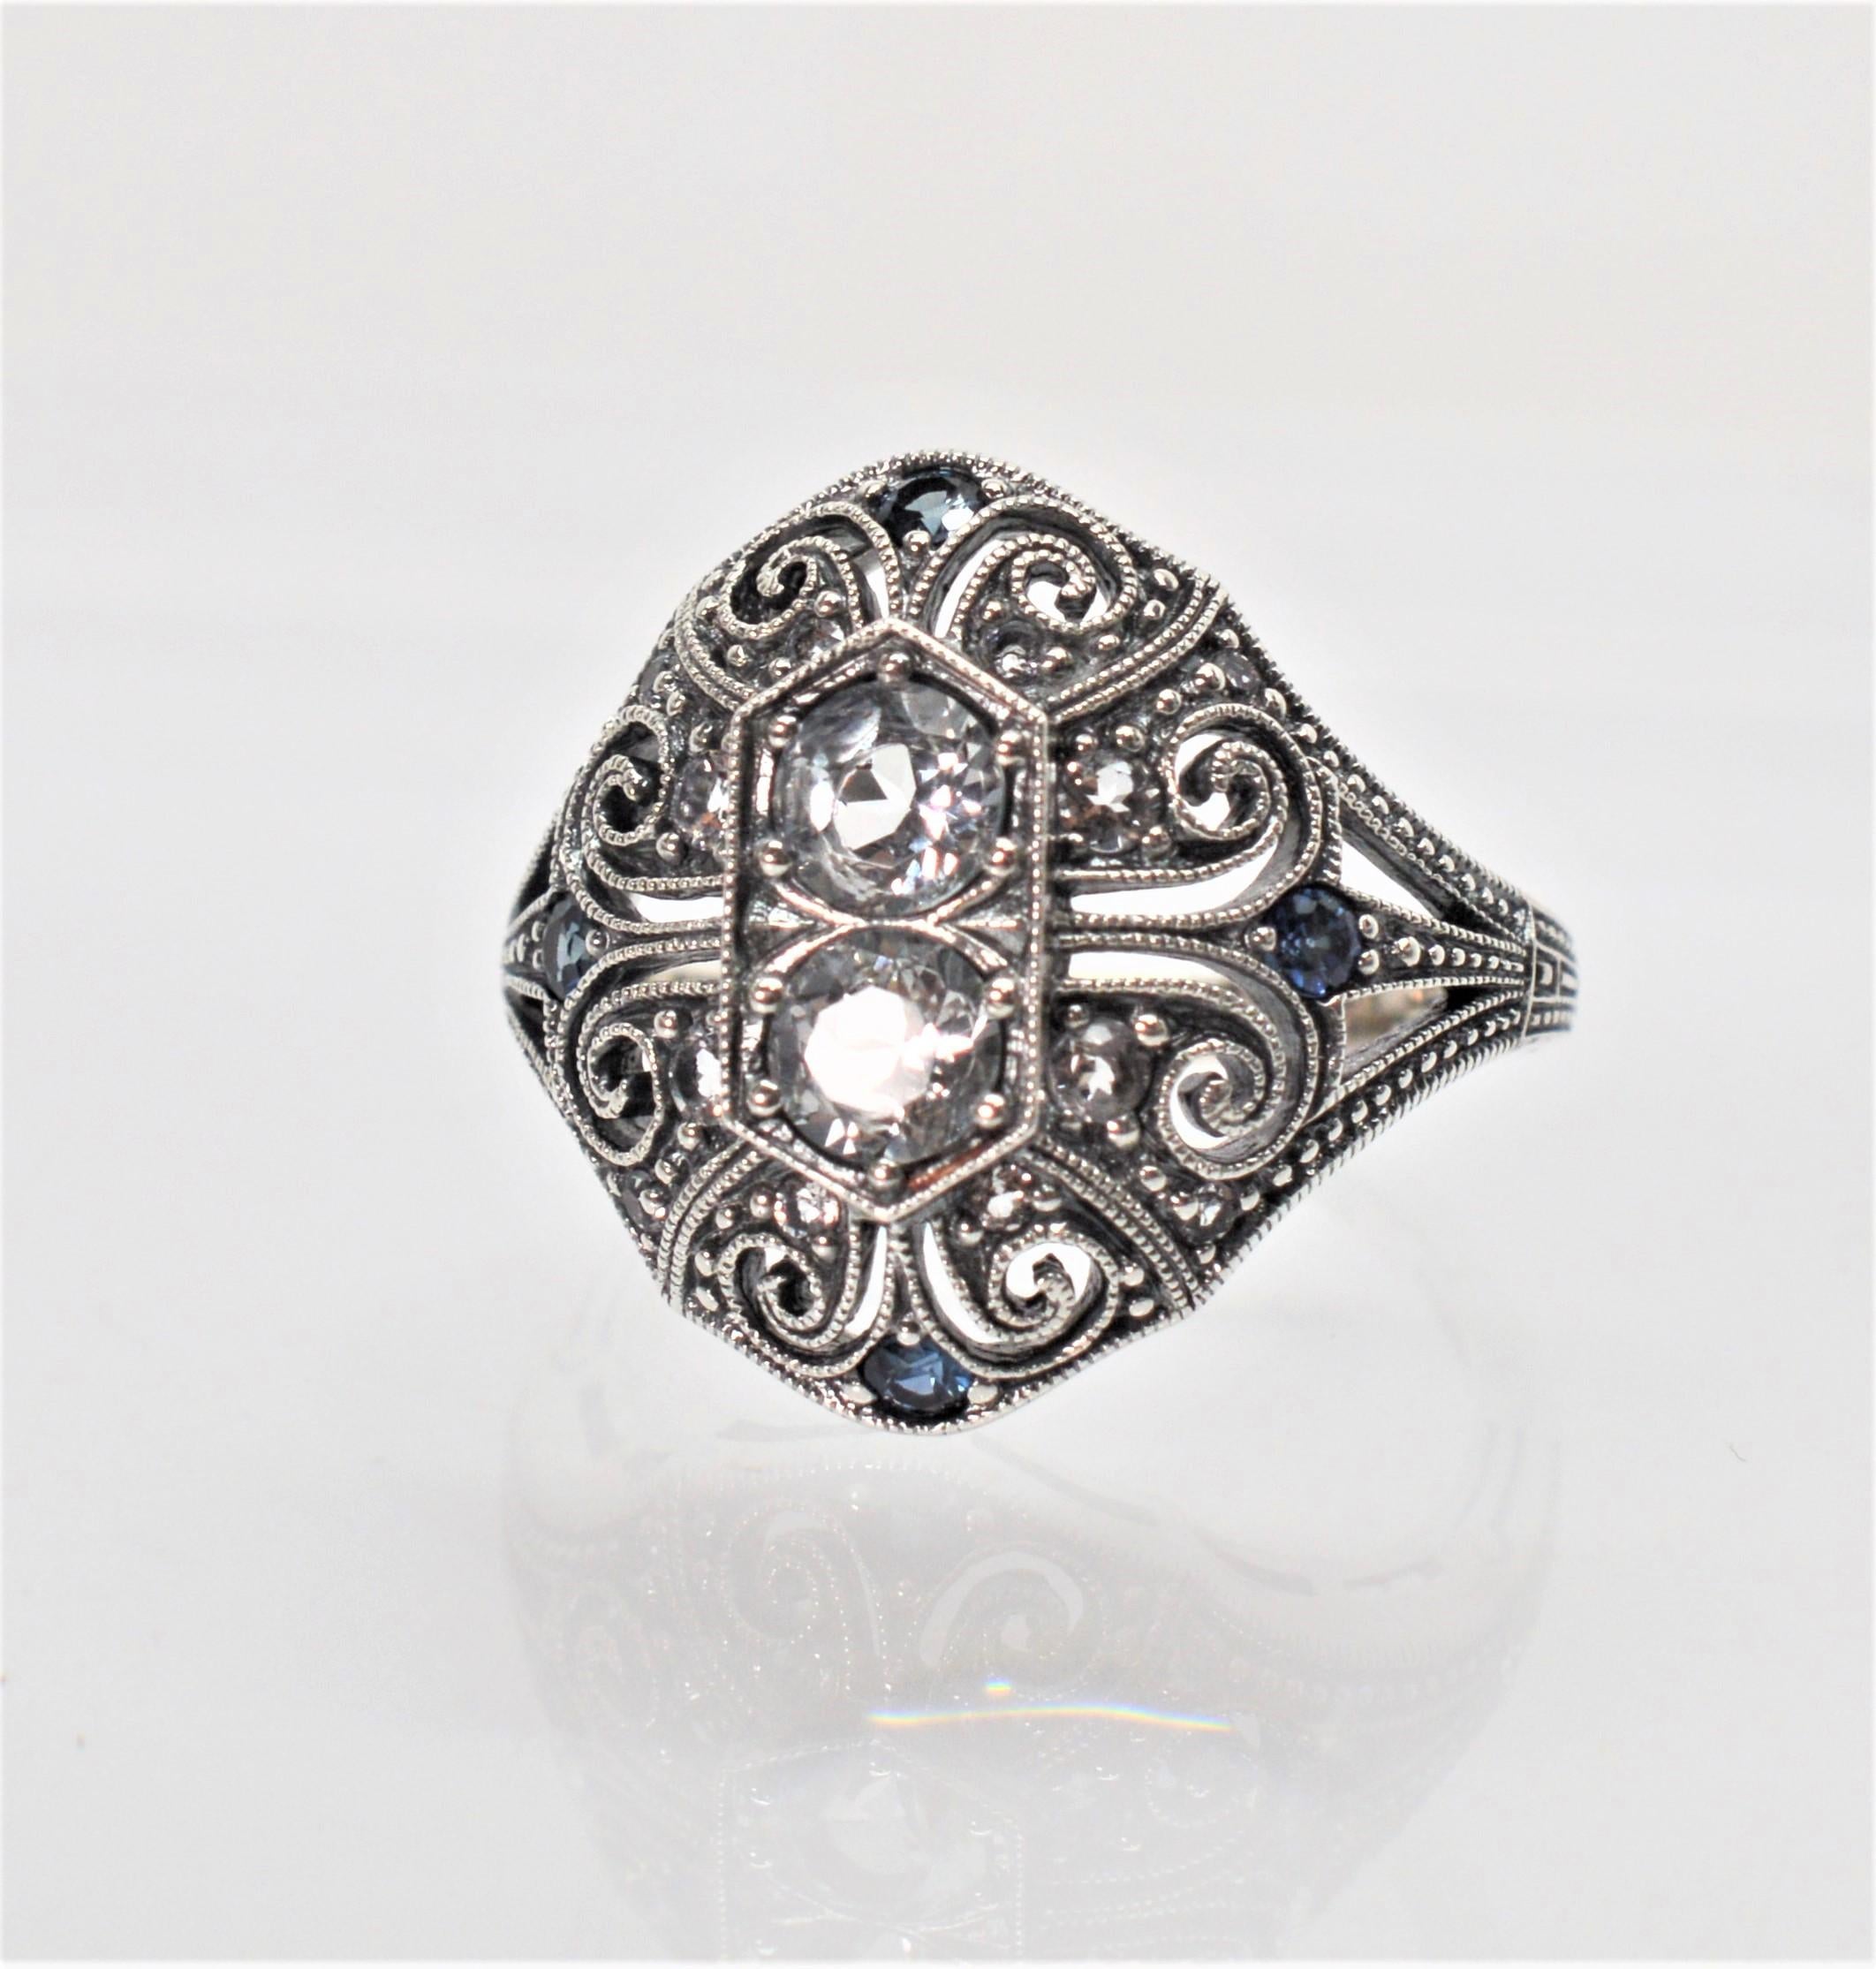 Enjoy this timeless vintage design with exquisite sterling silver filigree detail reminiscent of the Art Deco Period. This dome style ring has twin .20 carat round faceted white topaz center stones, .40 carats TW,  and is accented with tiny blue